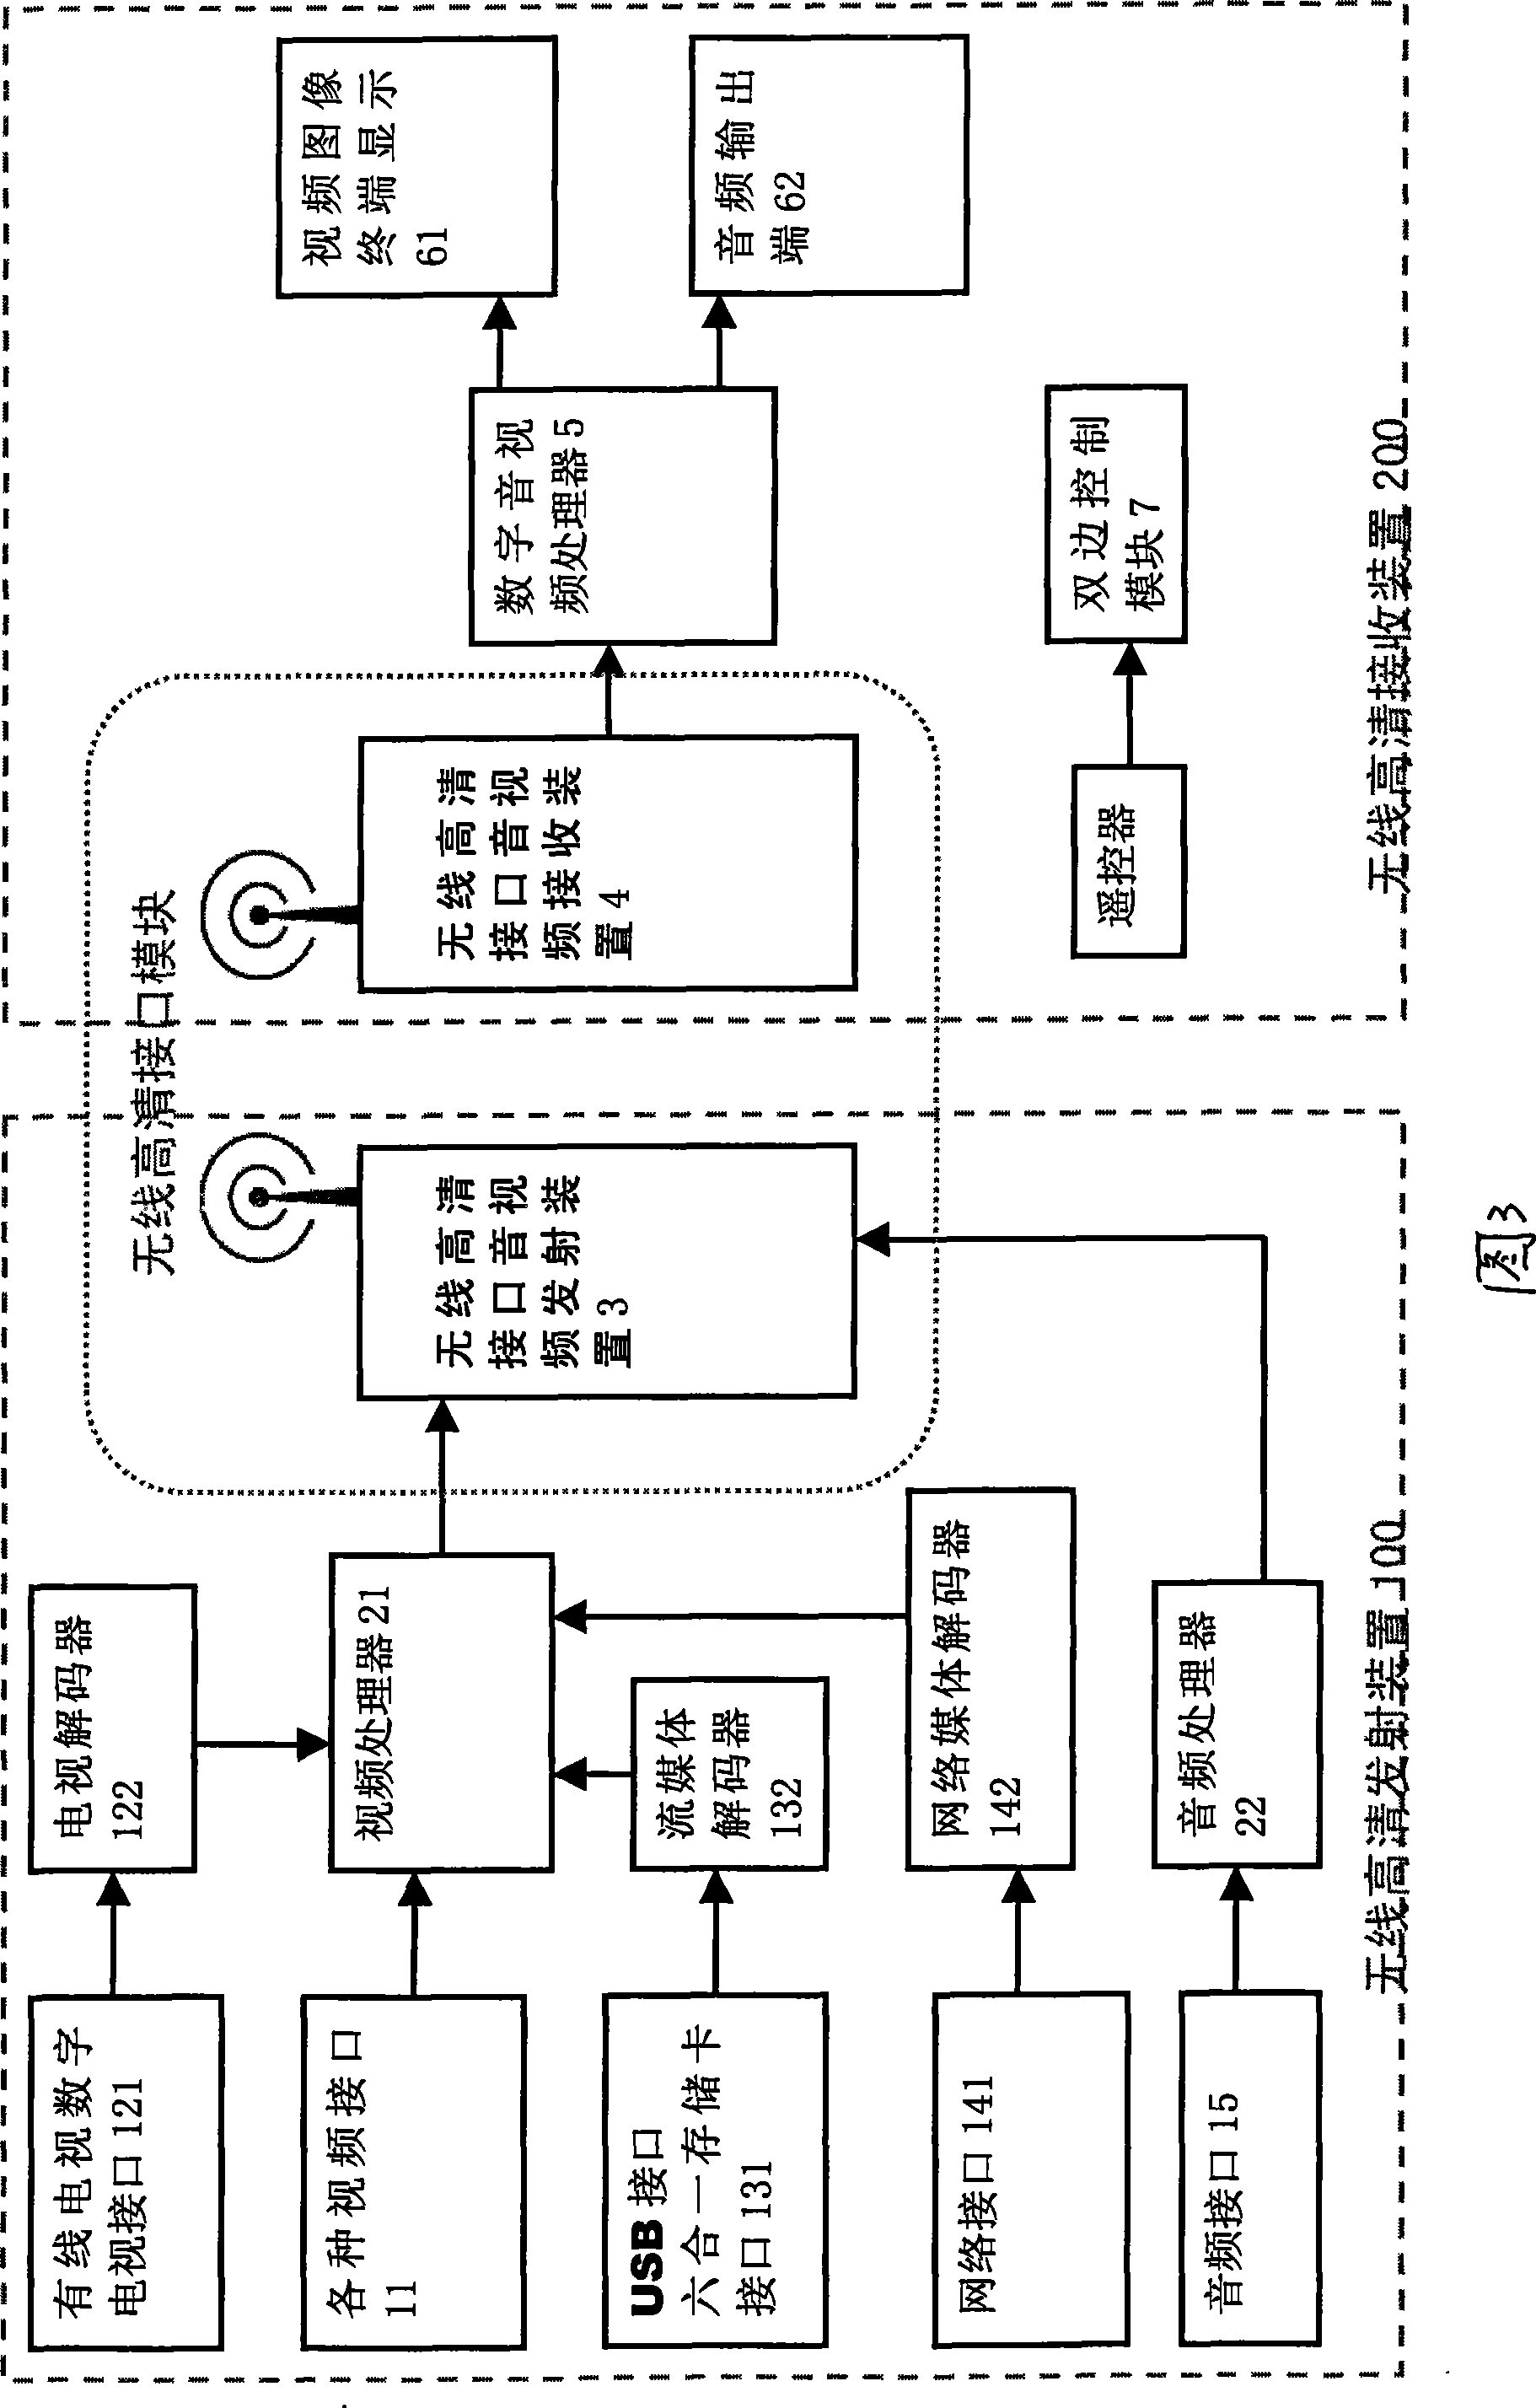 Non-compressed transmitting and receiving integrated display device for wireless digital high resolution audio and video signal